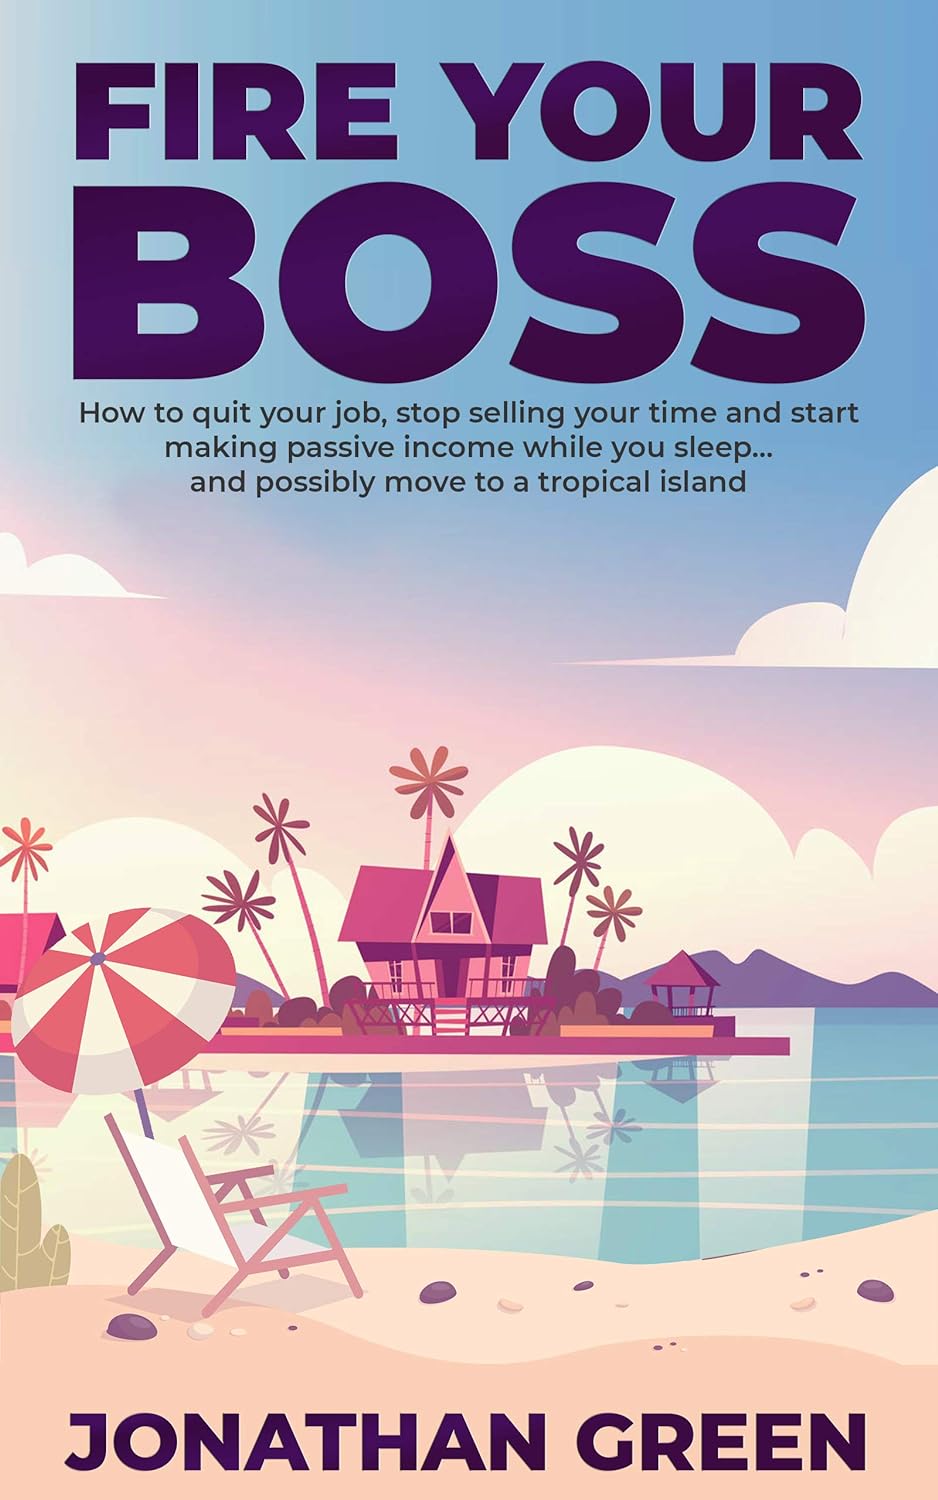 Fire Your Boss How to quit your job and start making passive income